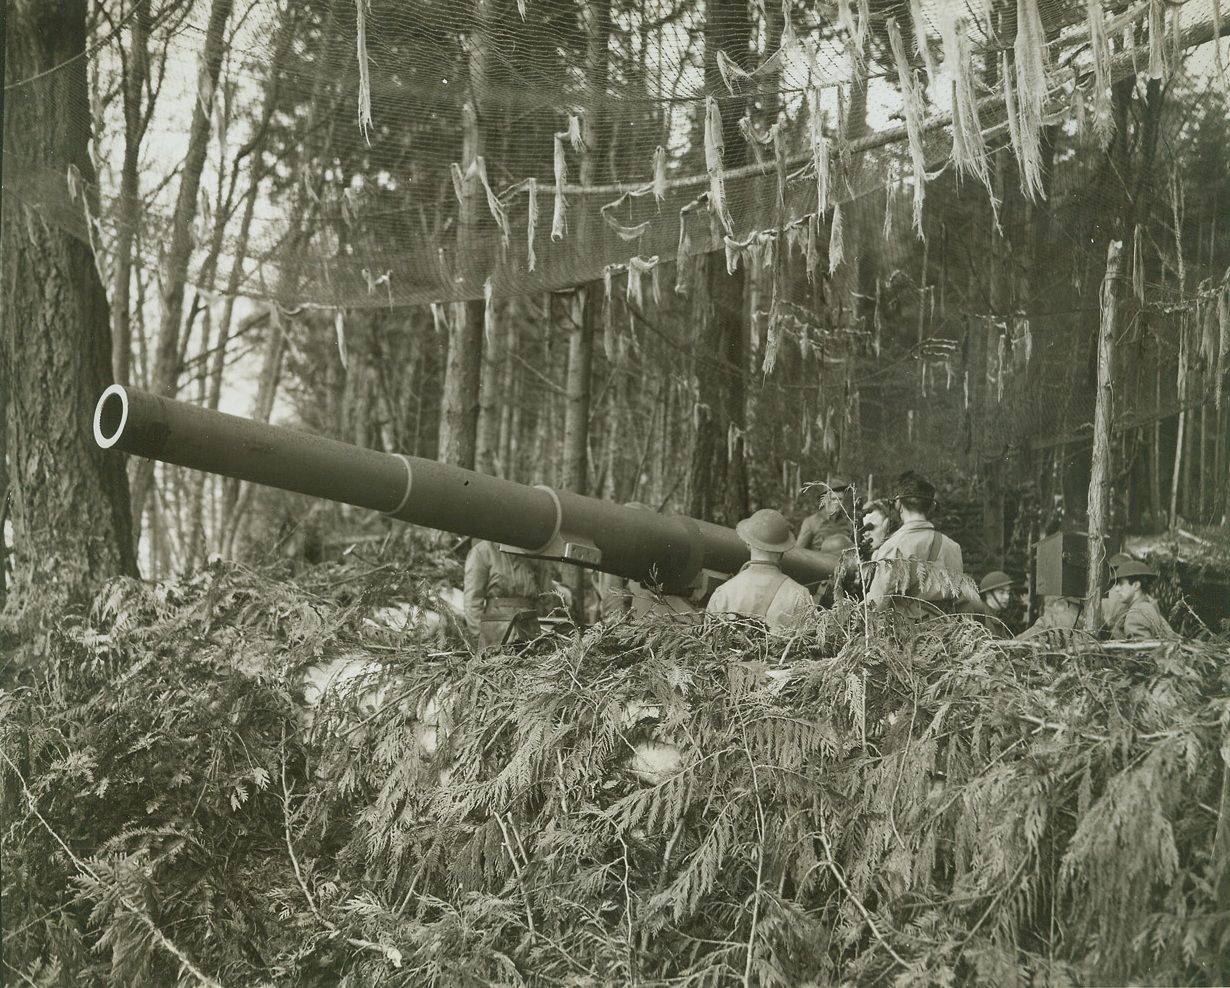 Seen Any “Visitors”?, 2/7/1942. One of the Army’s heavy mobile guns points out to sea somewhere in the Pacific Northwest from its camouflaged hiding place in the forest. Credit line (ACME);